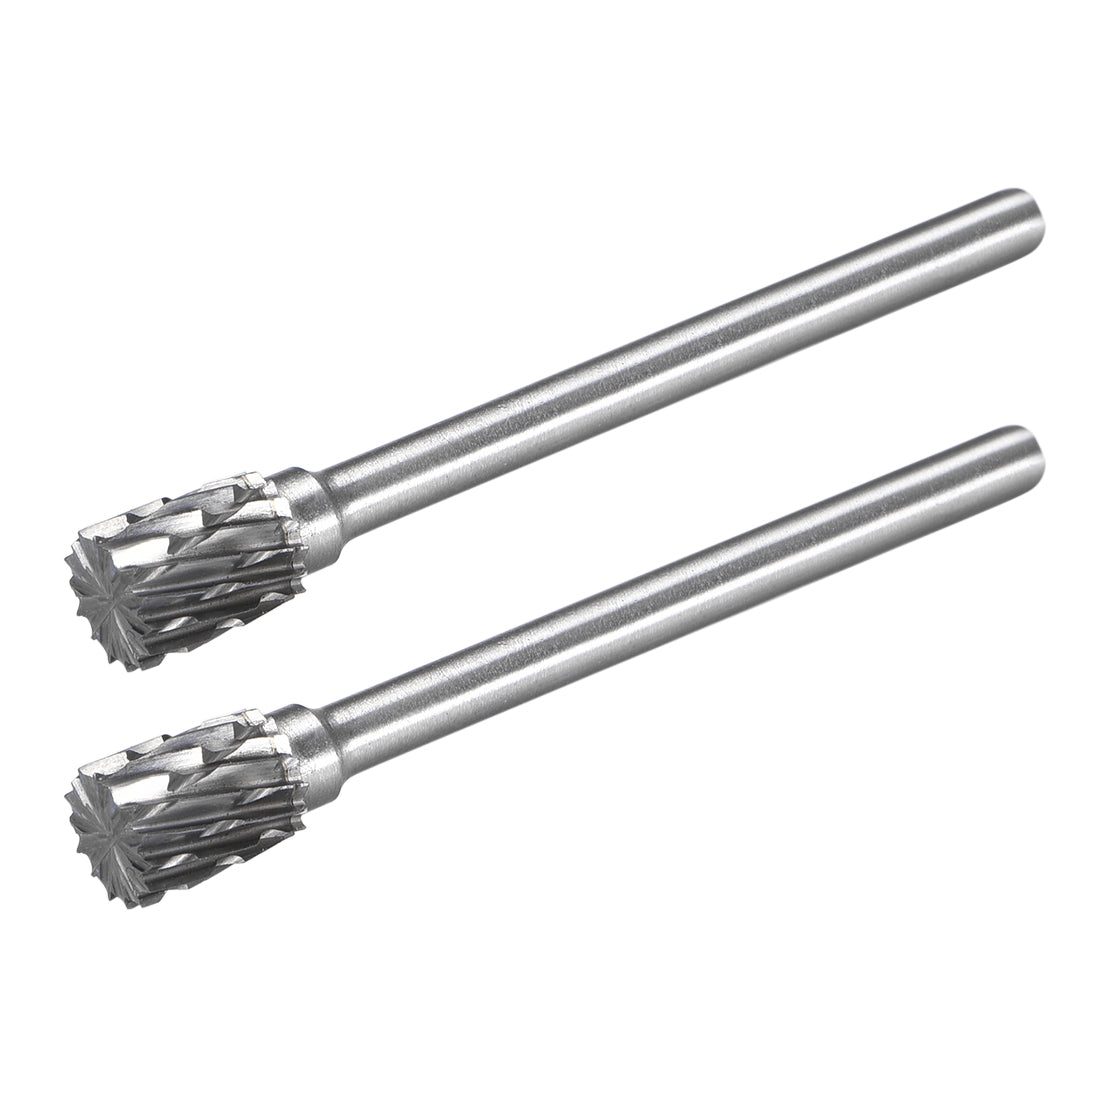 uxcell Uxcell Tungsten Carbide Double Cut Rotary File Cylinder Shape with 1/8" Shank 2pcs